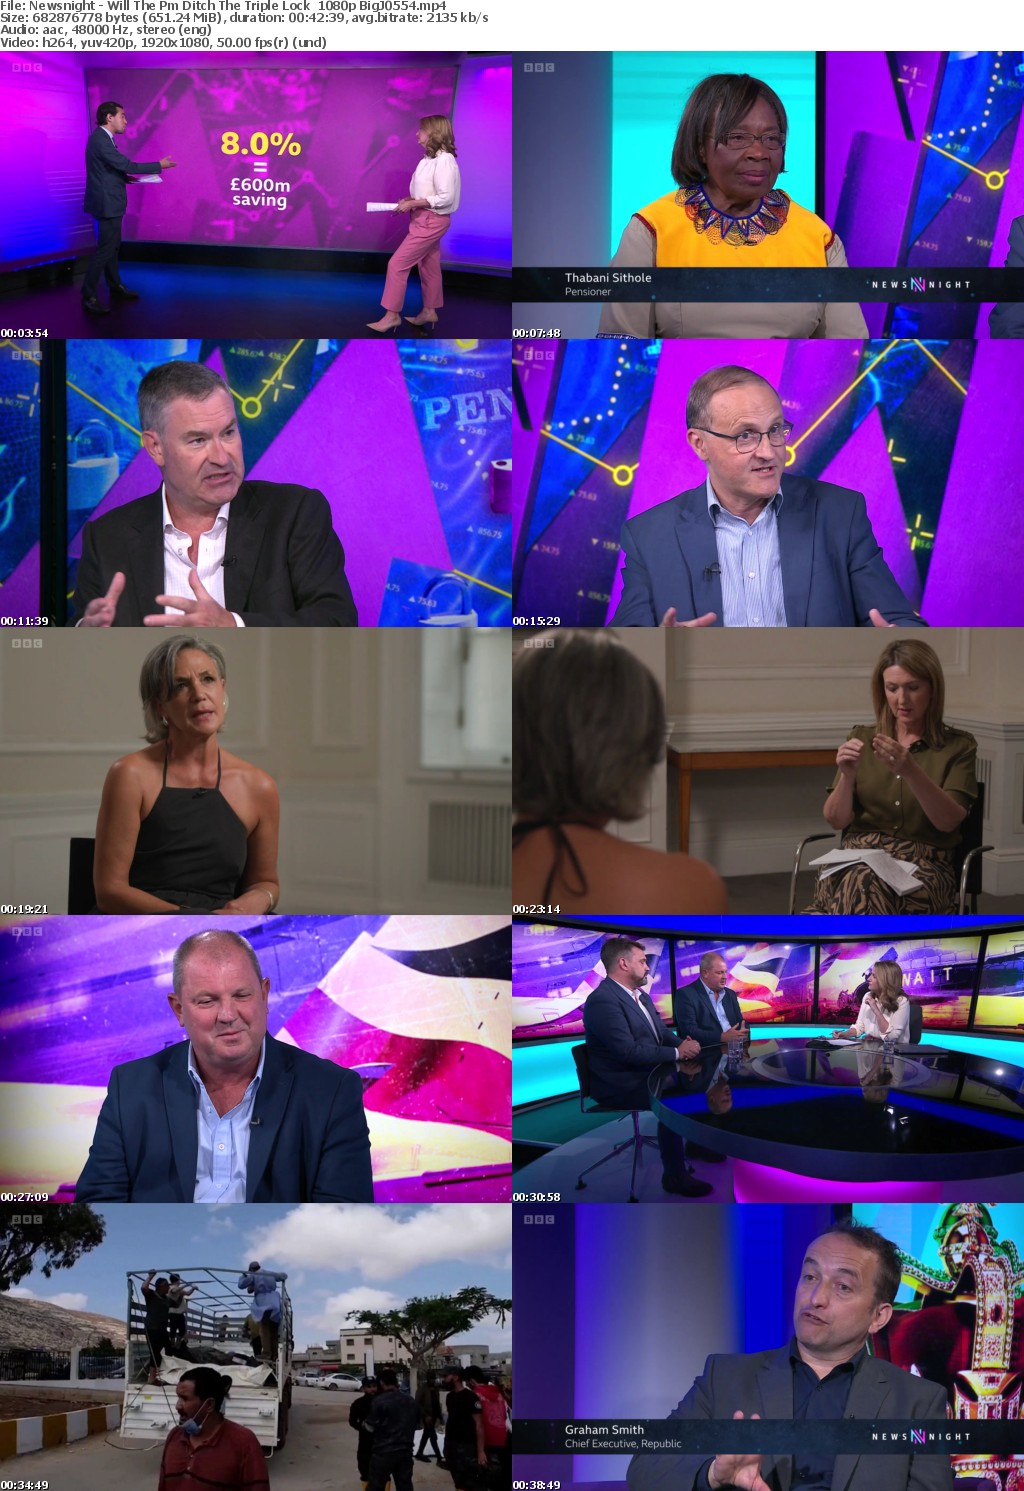 Newsnight - Will The Pm Ditch The Triple Lock 12 Sep 23 1080p + subs BigJ0554